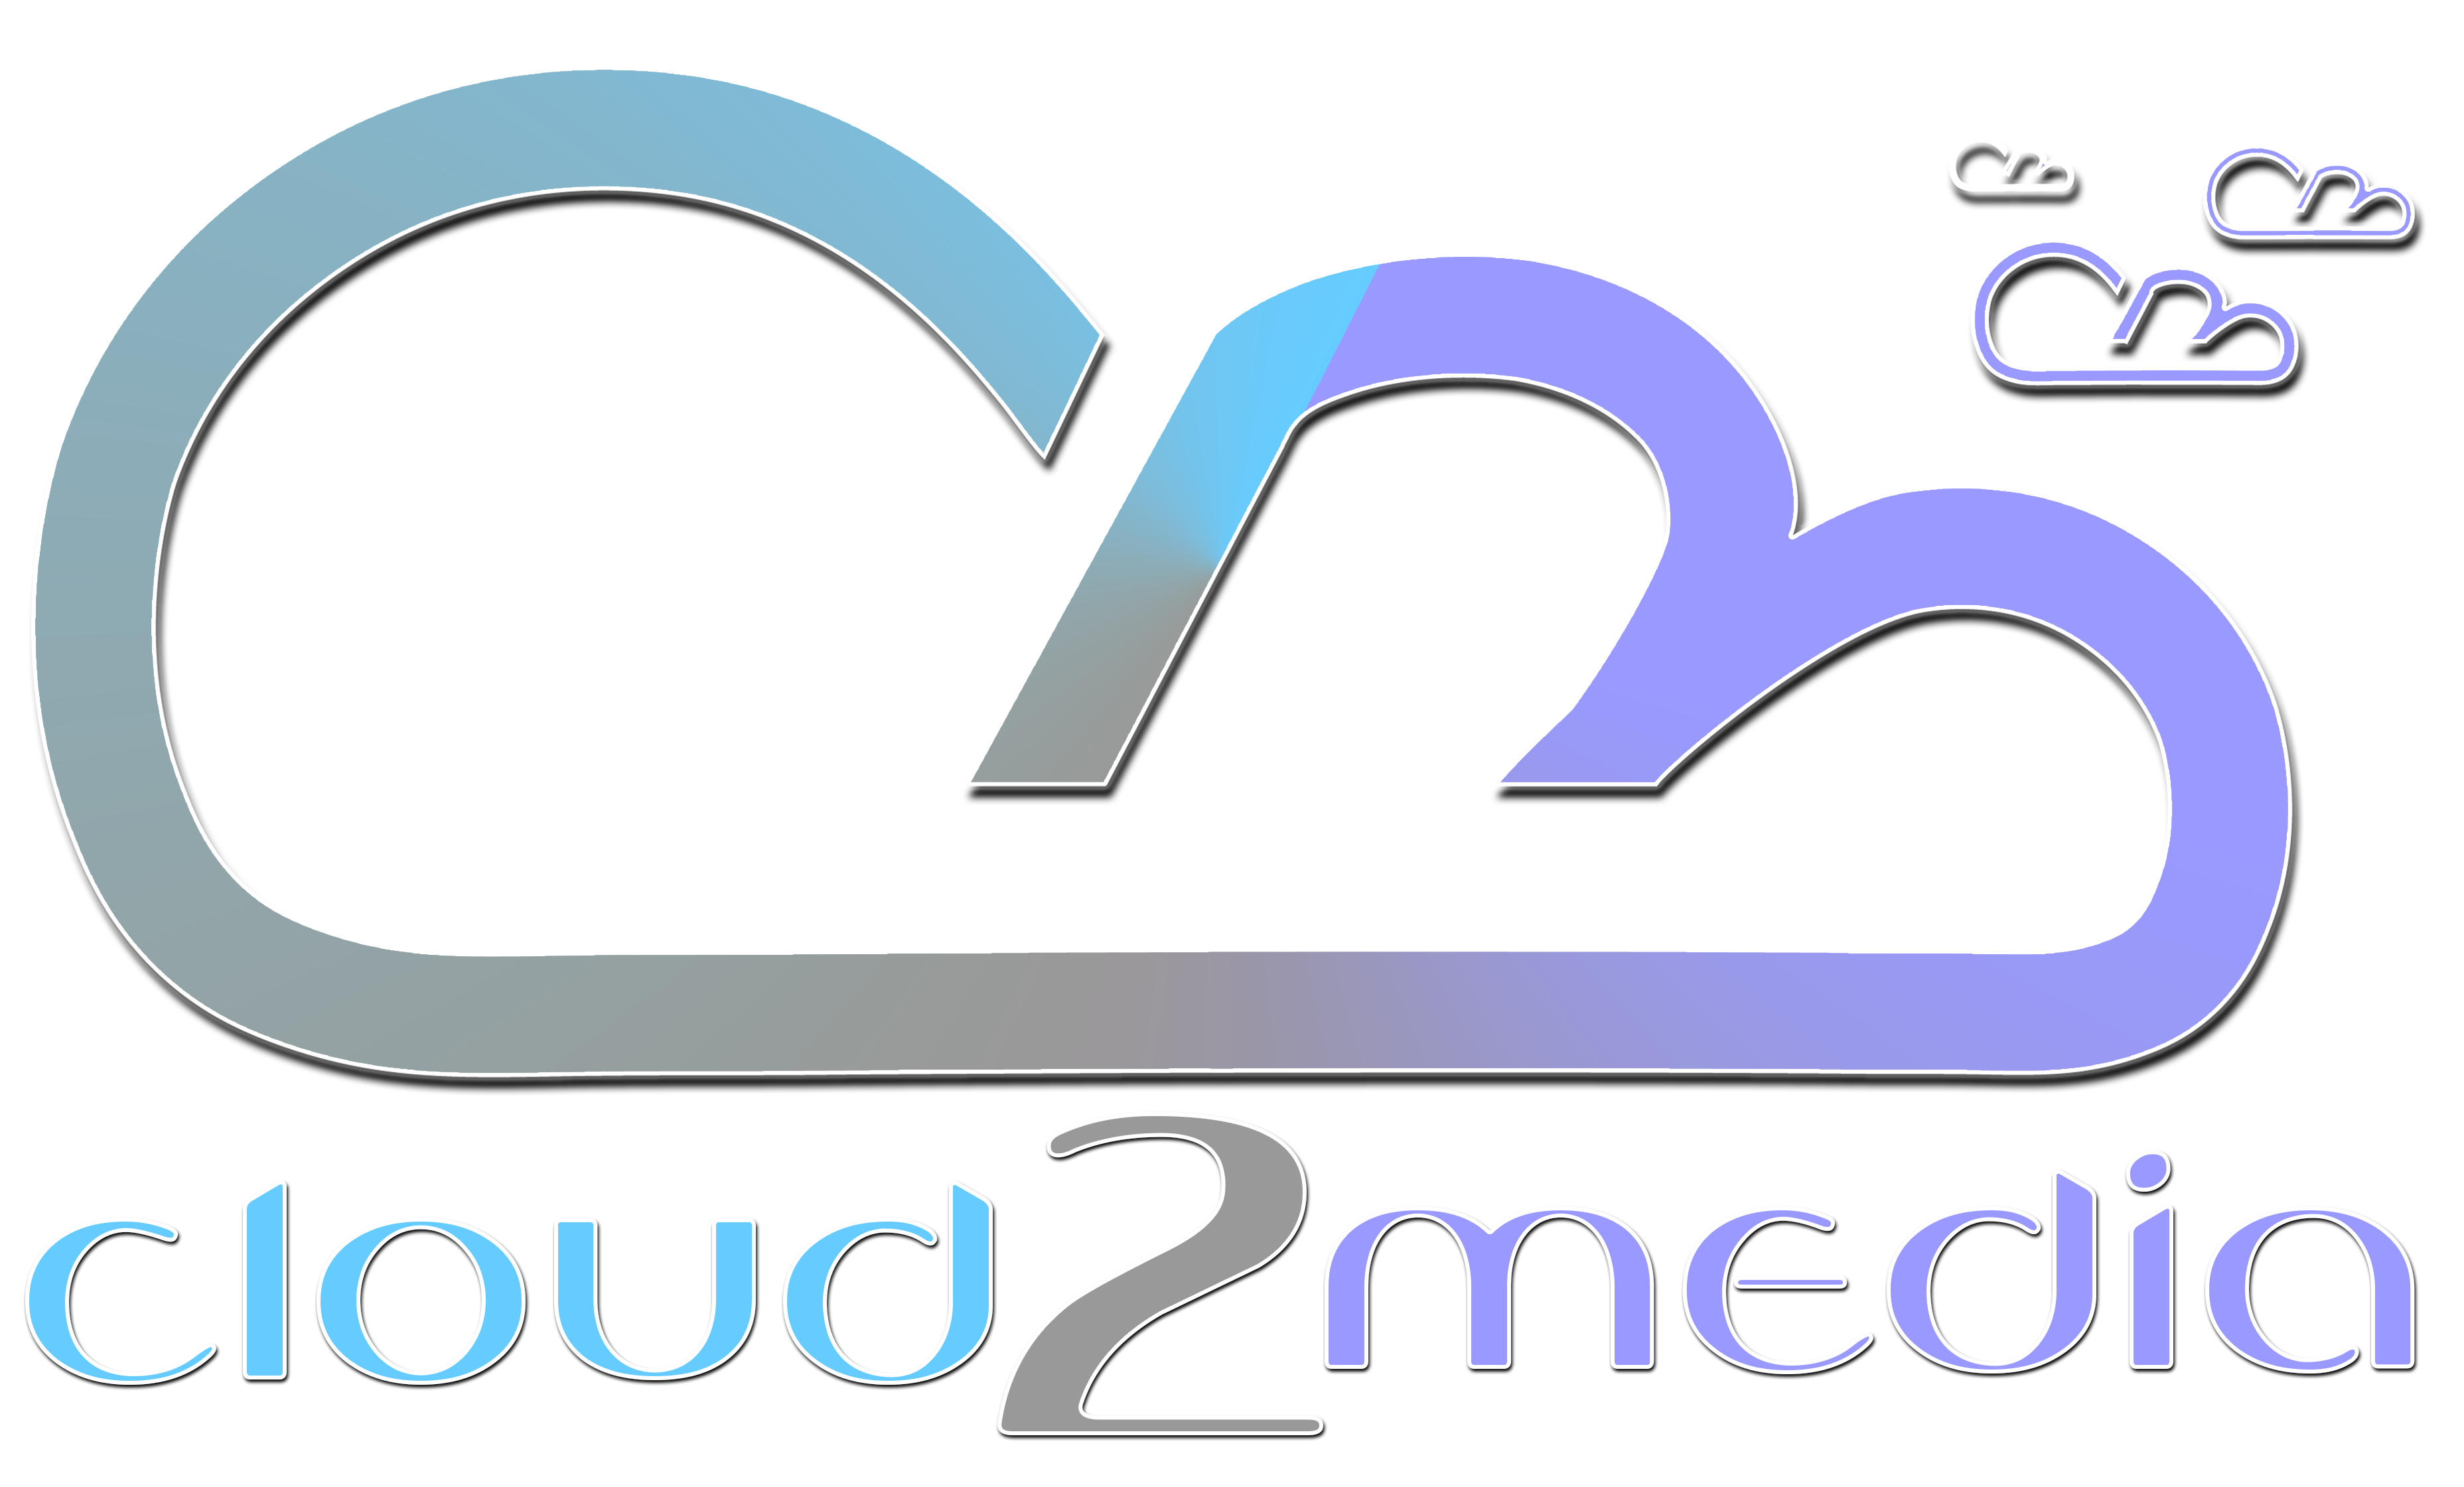 Media made in the cloud